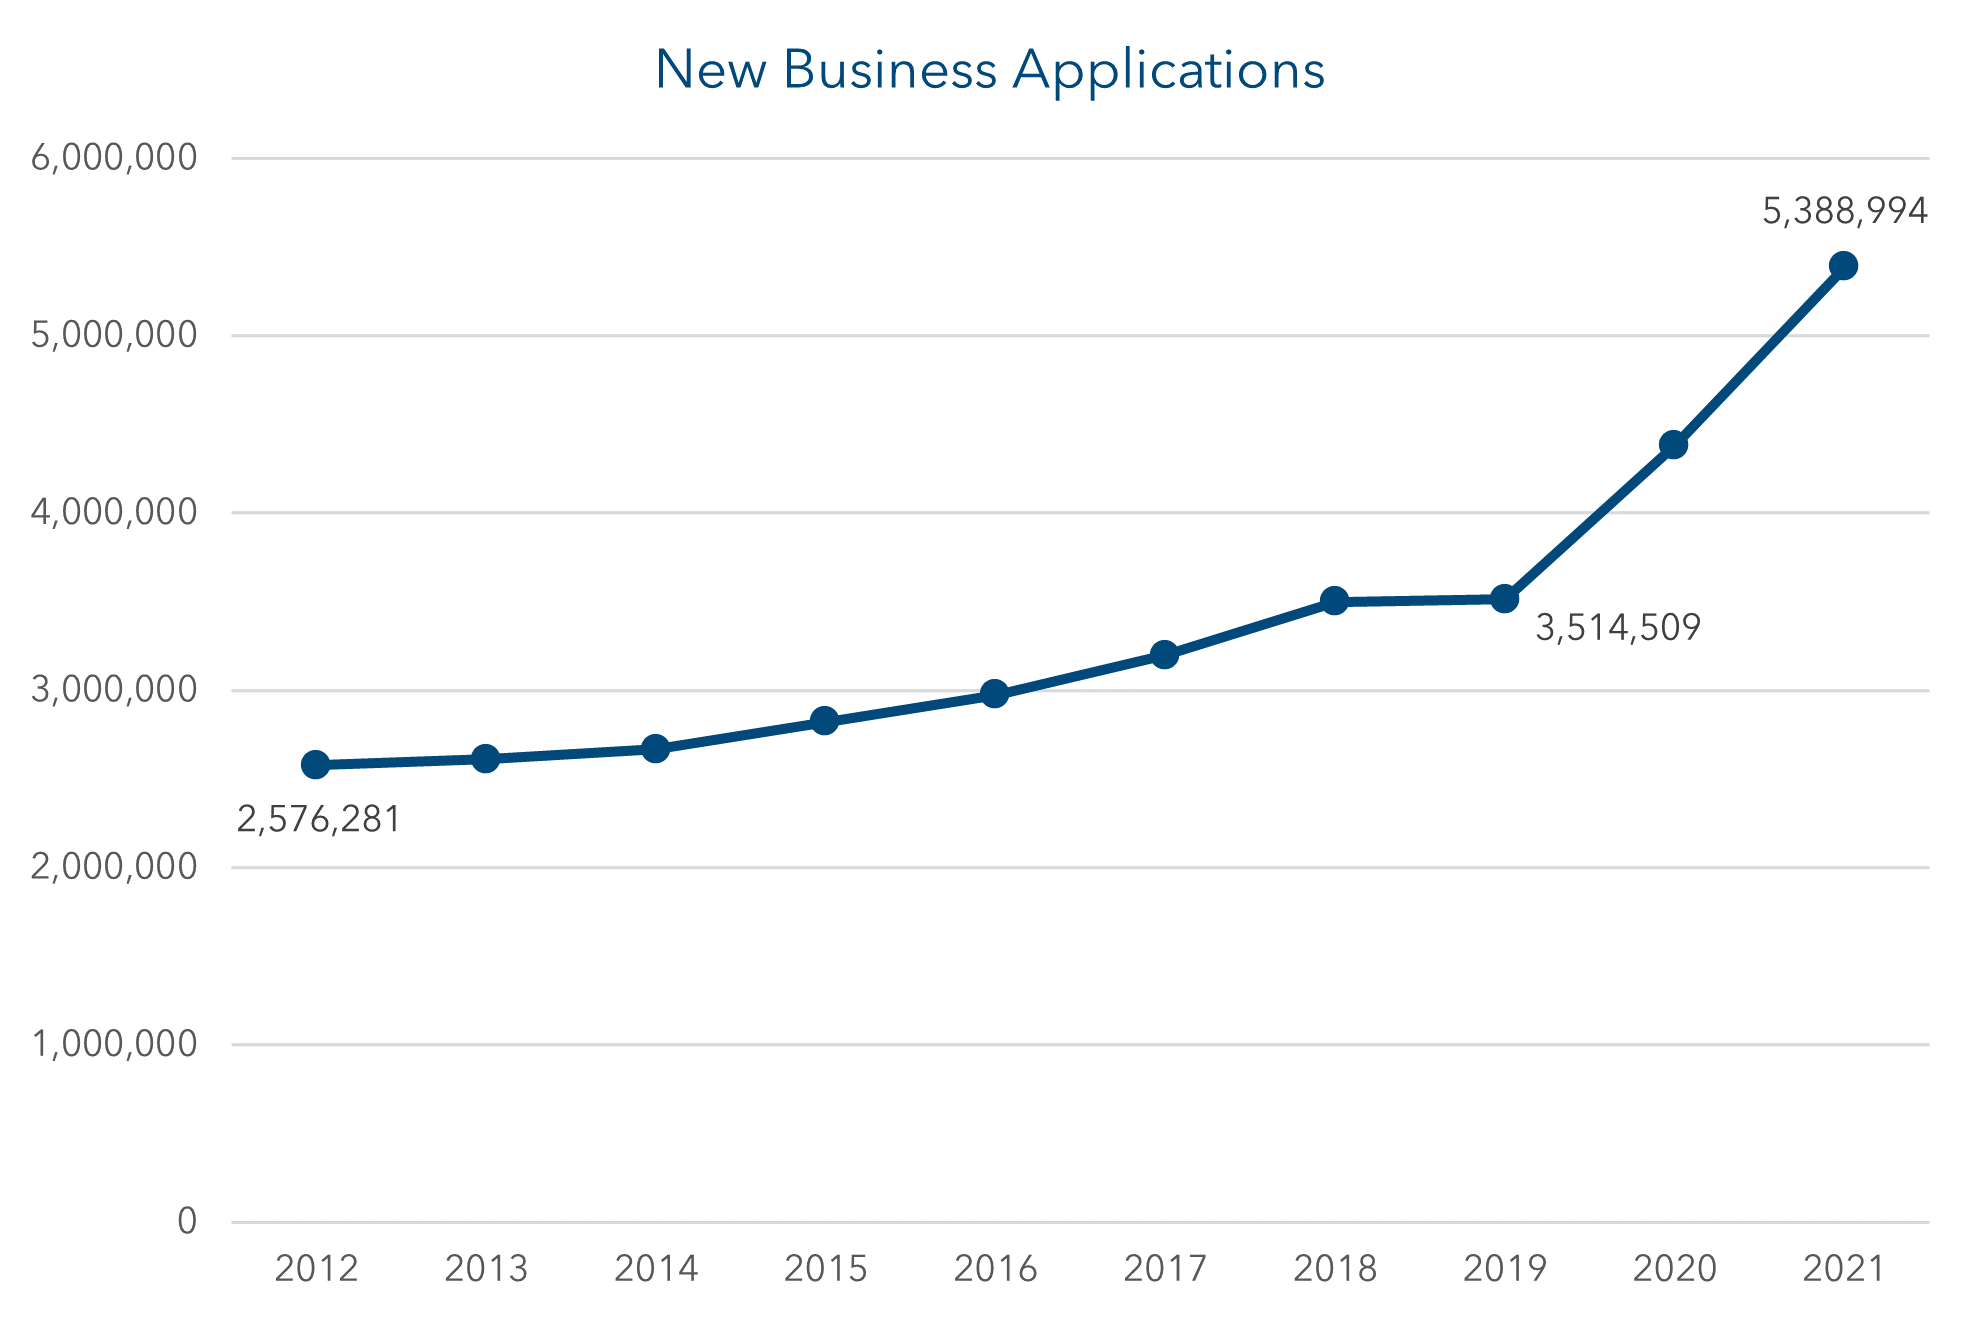 Graph of New Business Applications over time. Total new business applications rise steadily from 2,576,281 in 2012 to 3,514,509 in 2019, followed by a sharp rise to 5,388,994 in 2021.